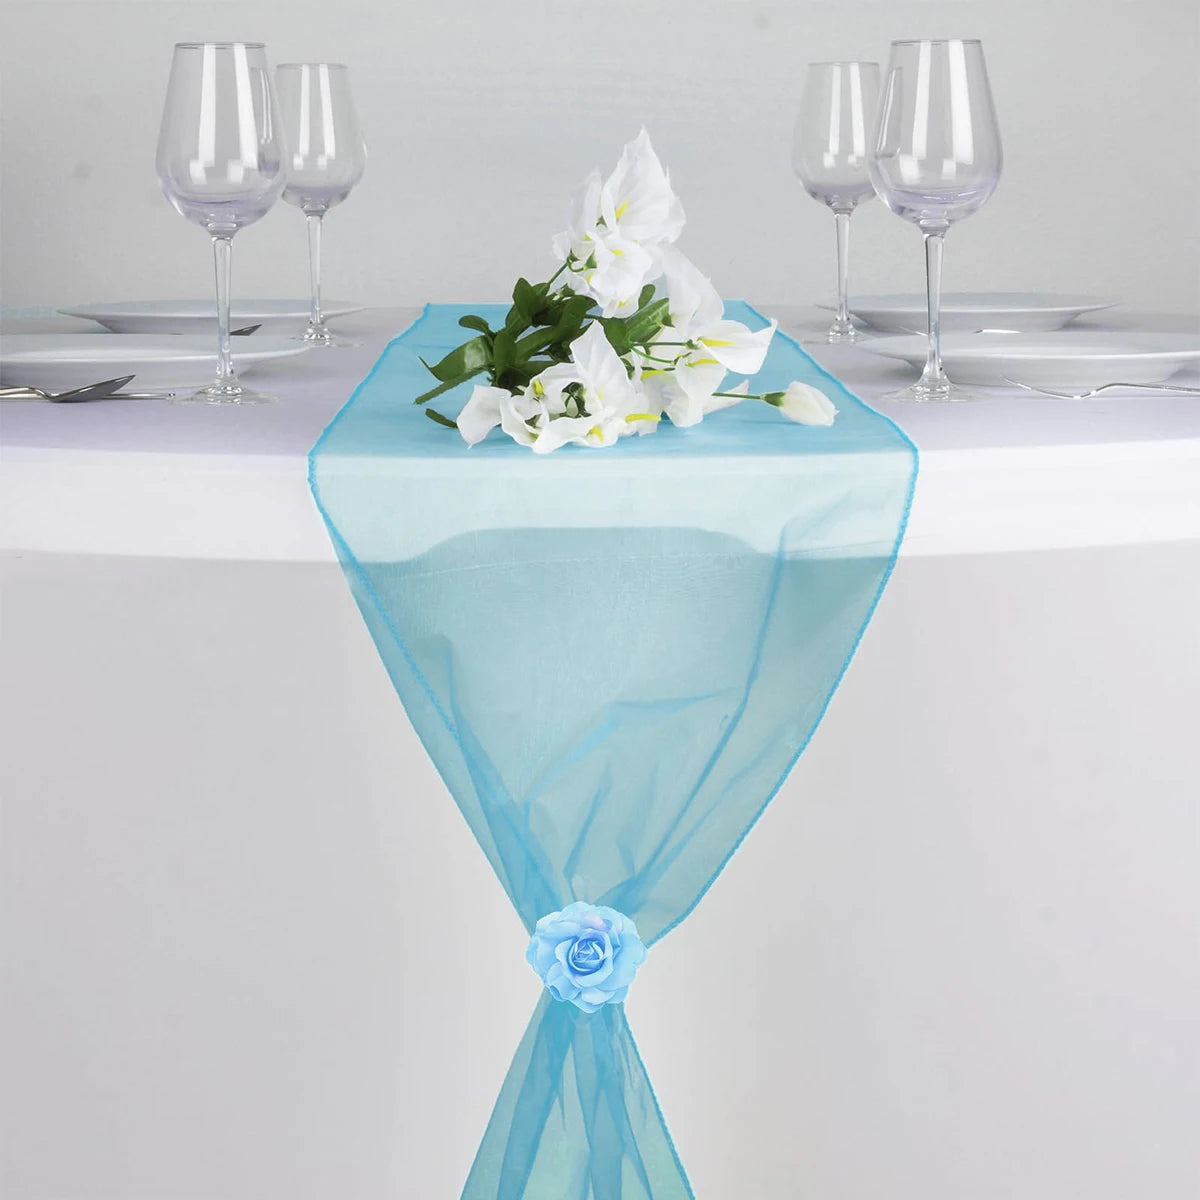 Sheer Organza Table Runner Luxury Dining Table Decoration